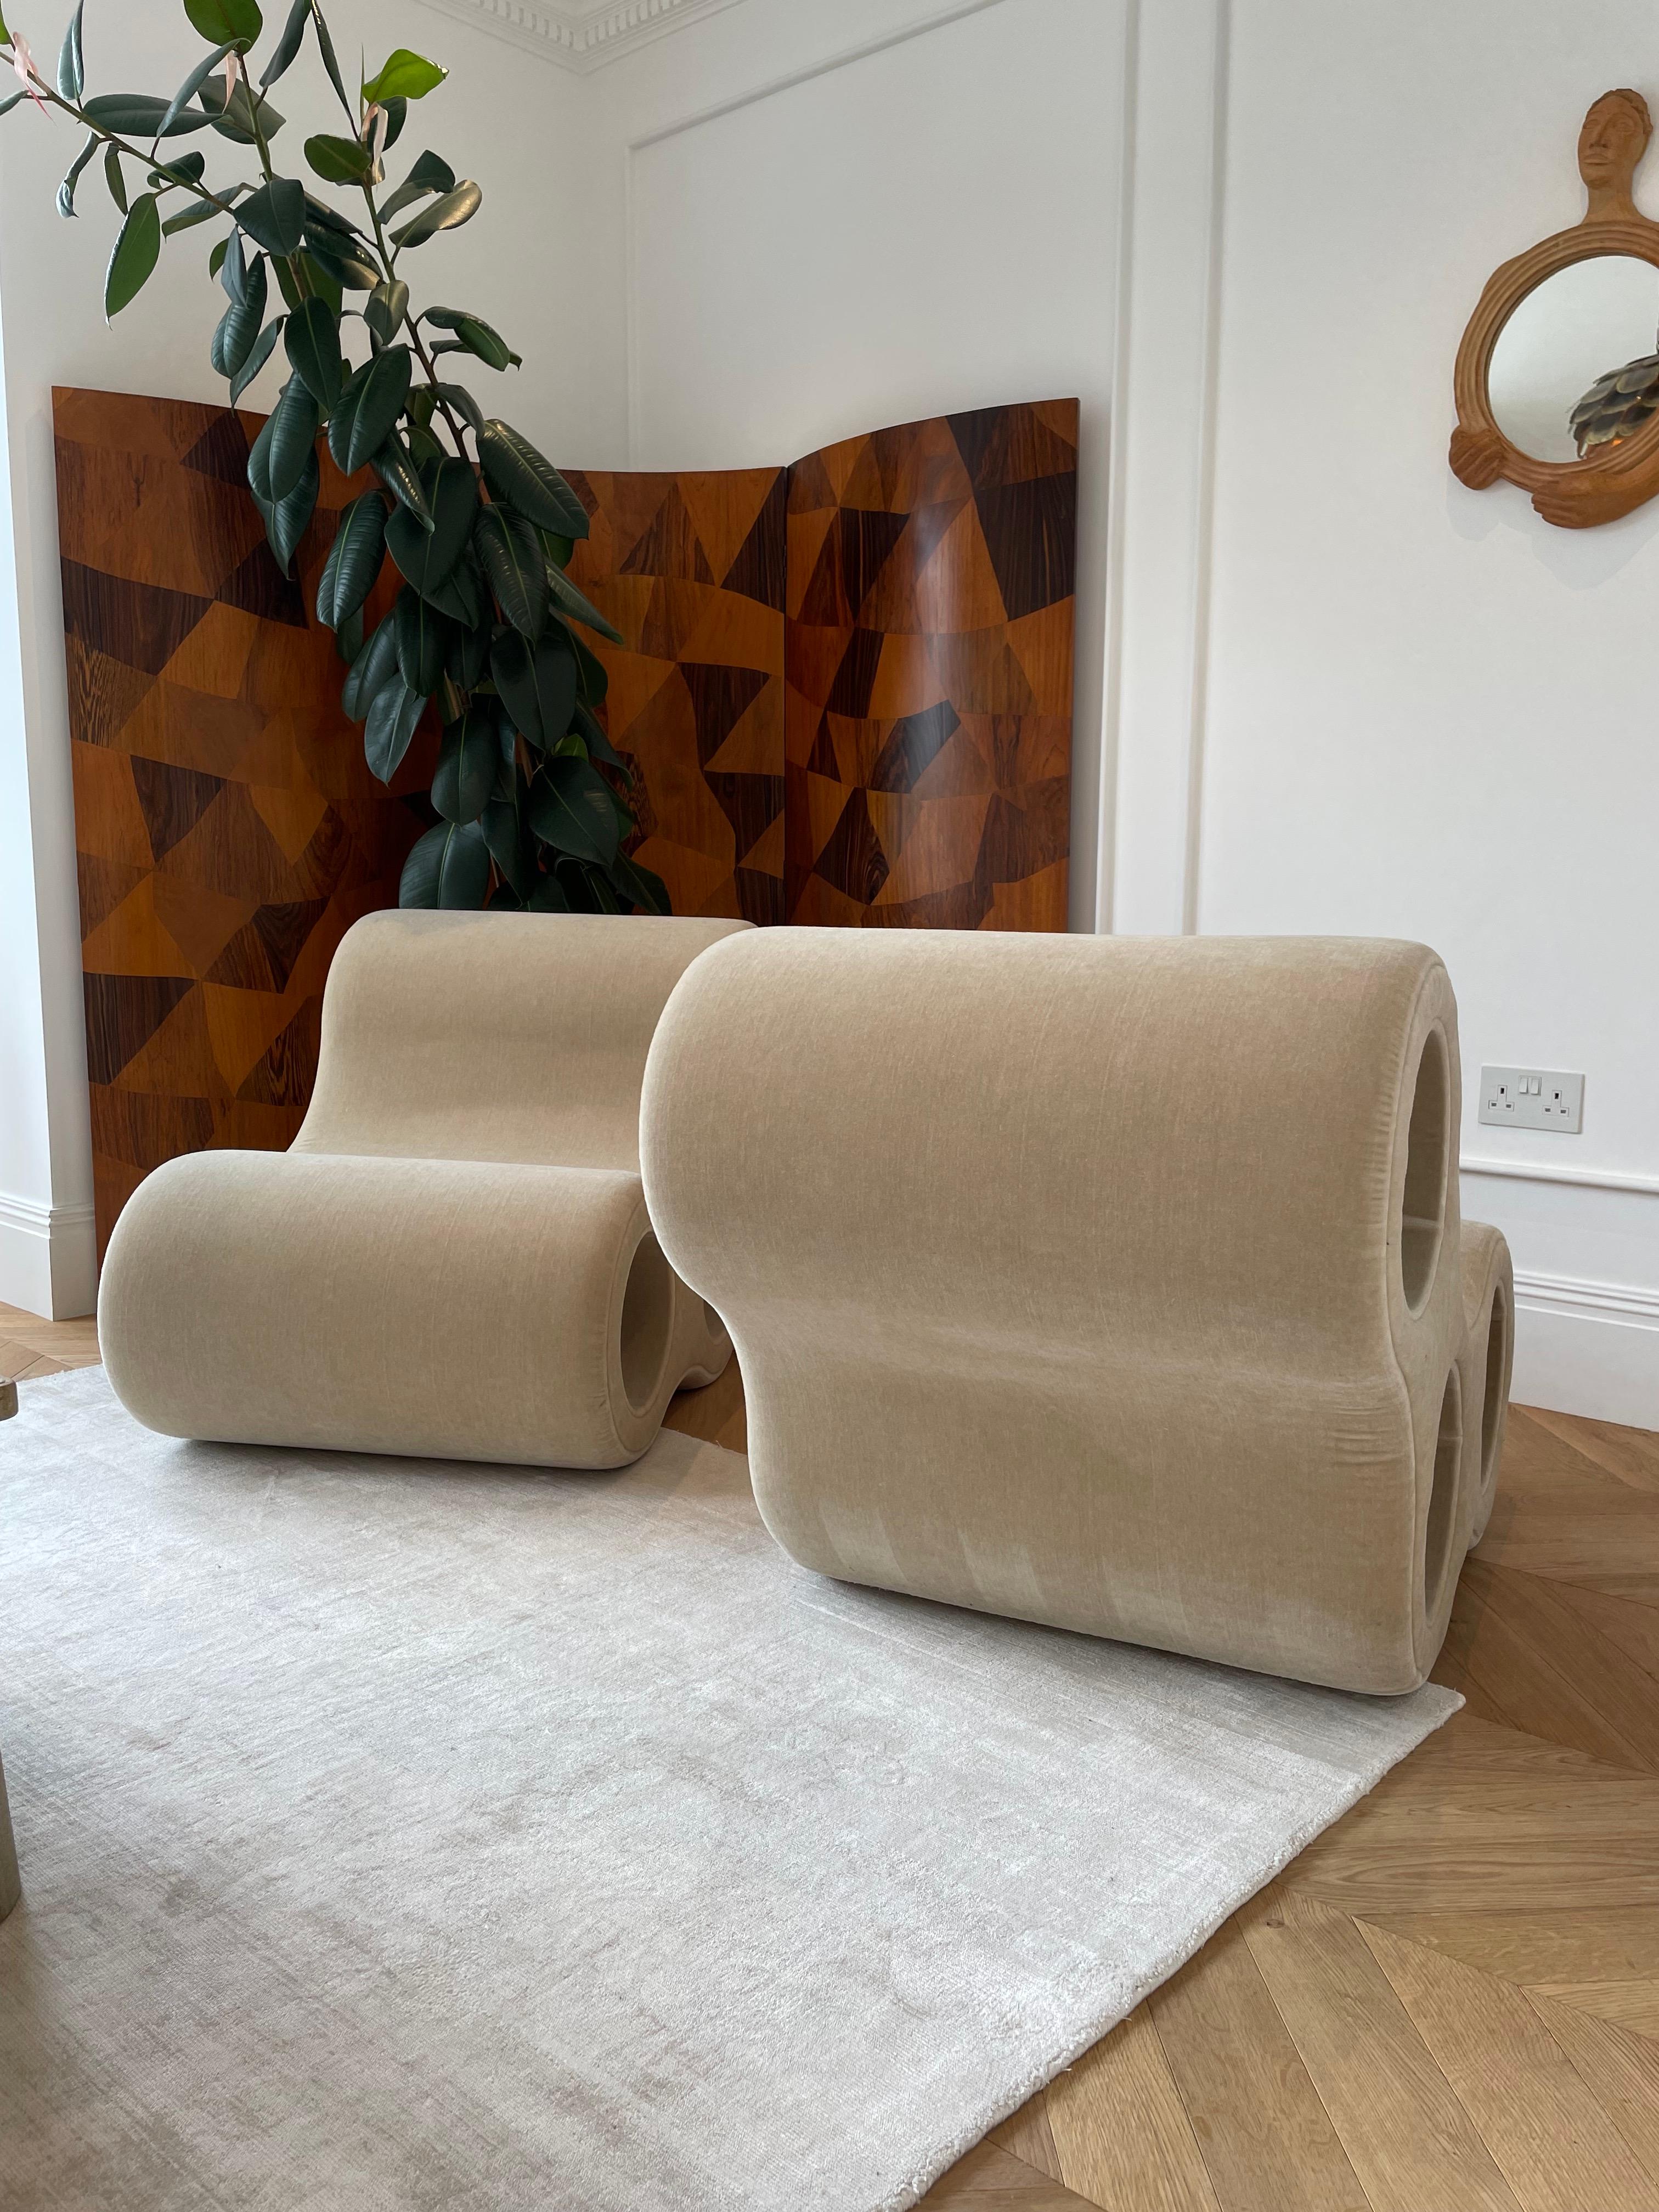 Late 20th Century 'Round One' Chairs by Leif Jorgensen, Mohair Velvet For Sale